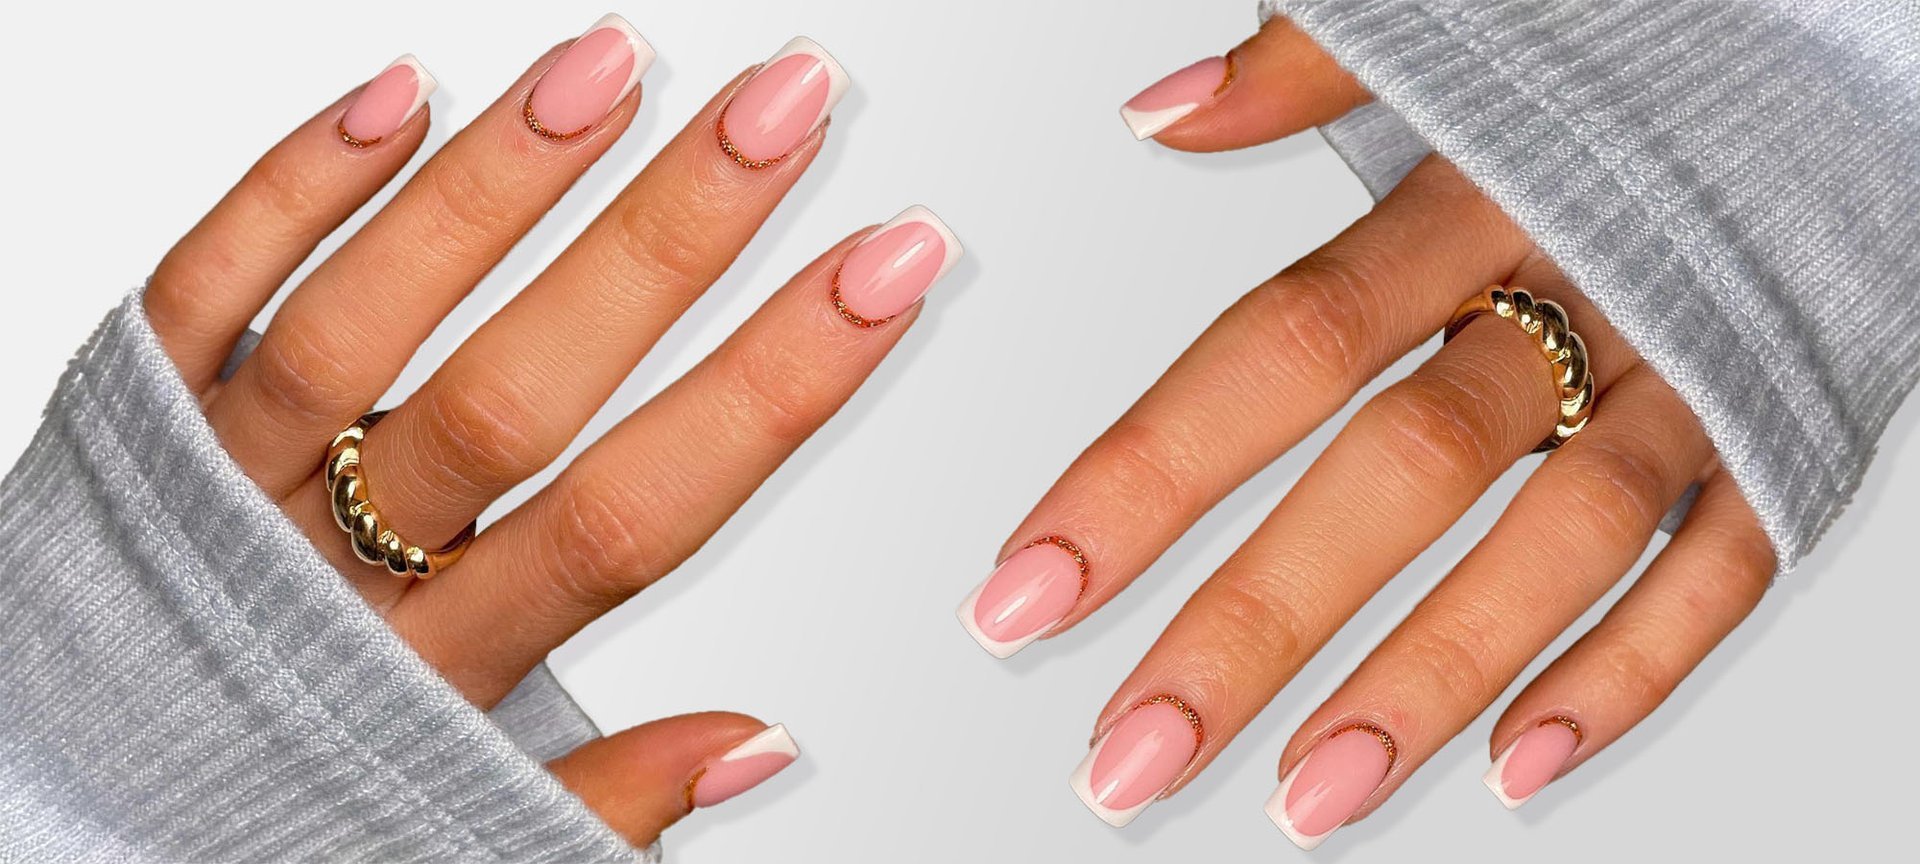 Acrylic vs gel nails: What's the difference and which is better?